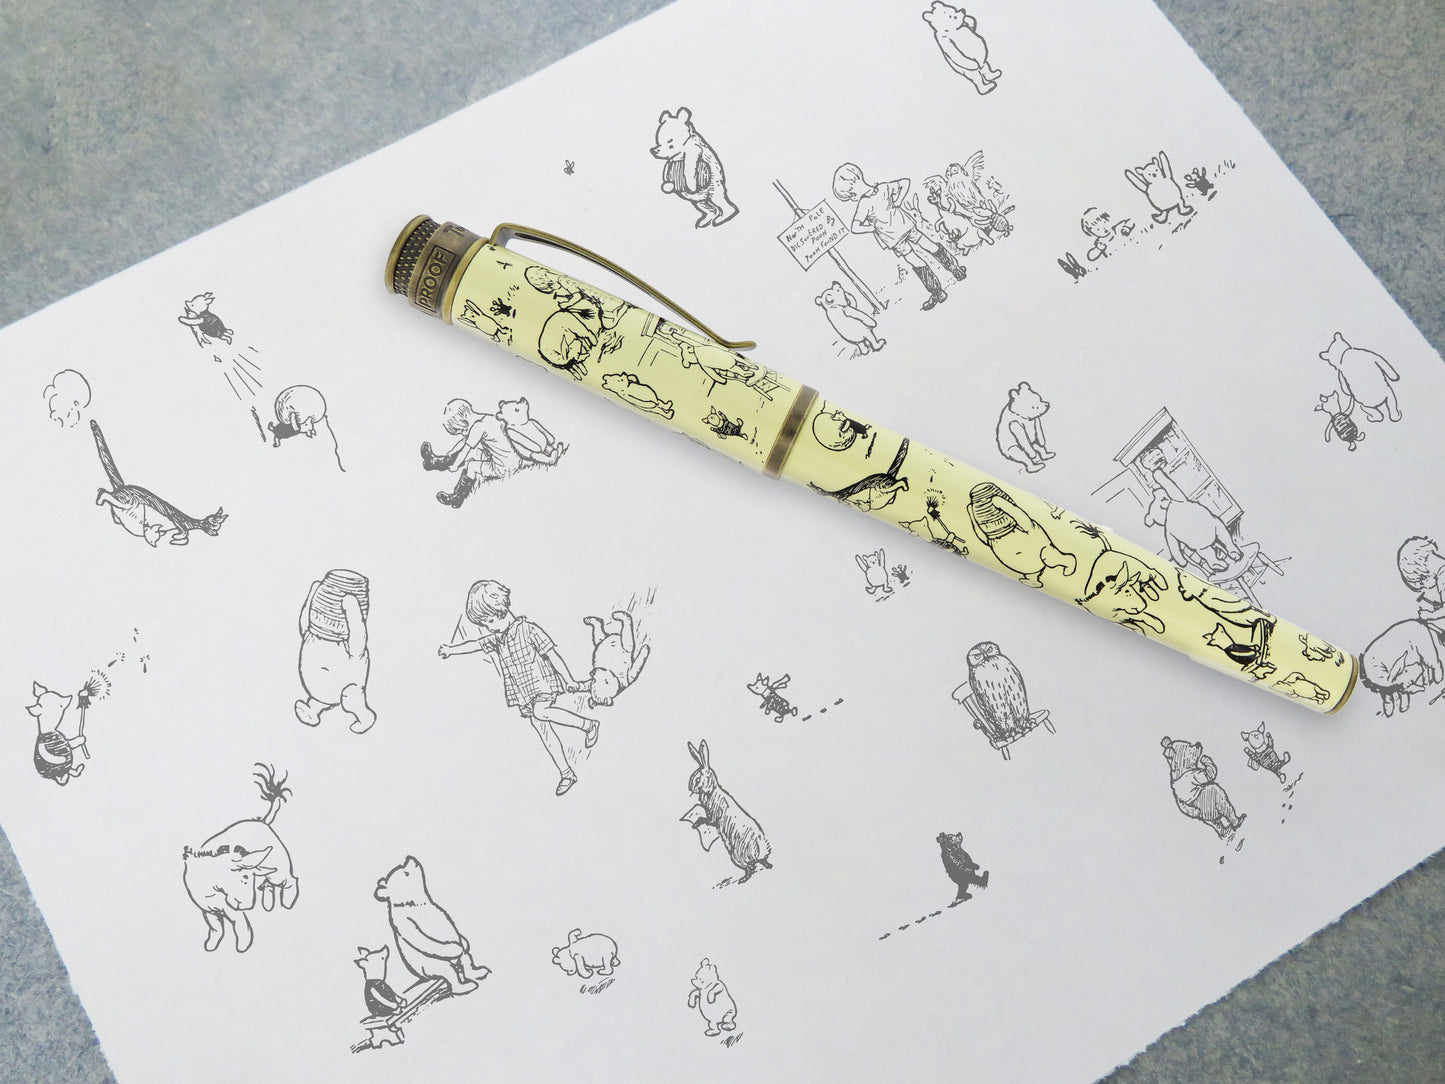 Retro 51 Tornado Fountain Pen - A.A. Milne Winnie-the-Pooh Decorations by E.H. Shepard (Numbered)